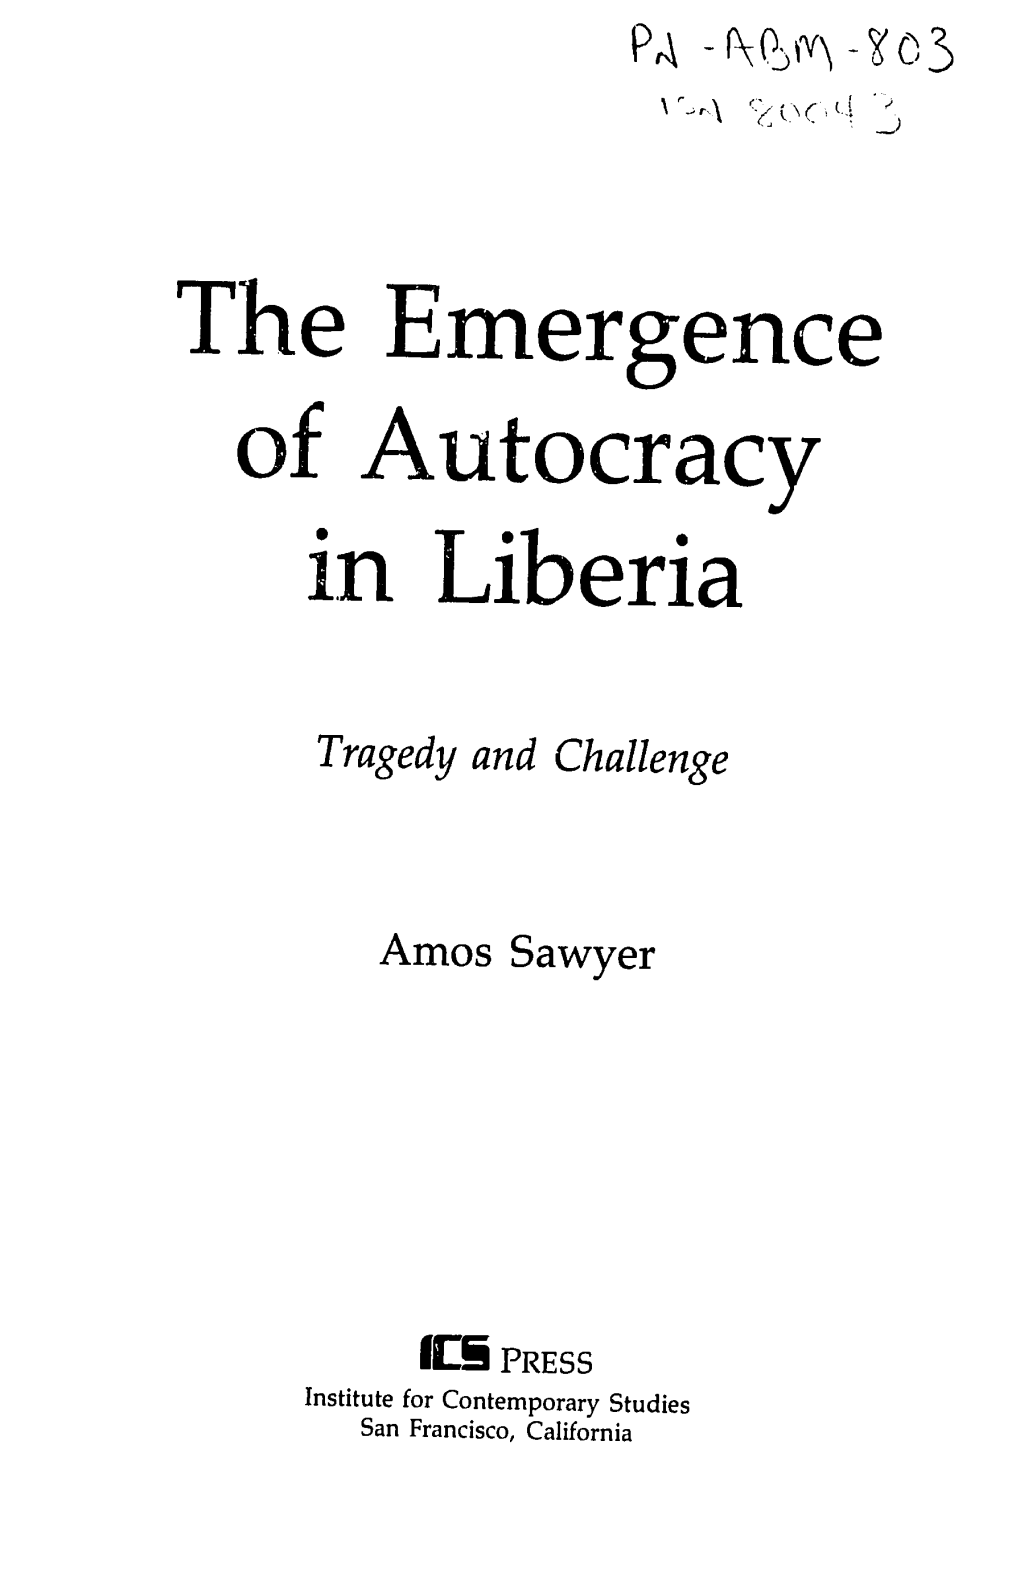 The Emergence of Autocracy in Liberia